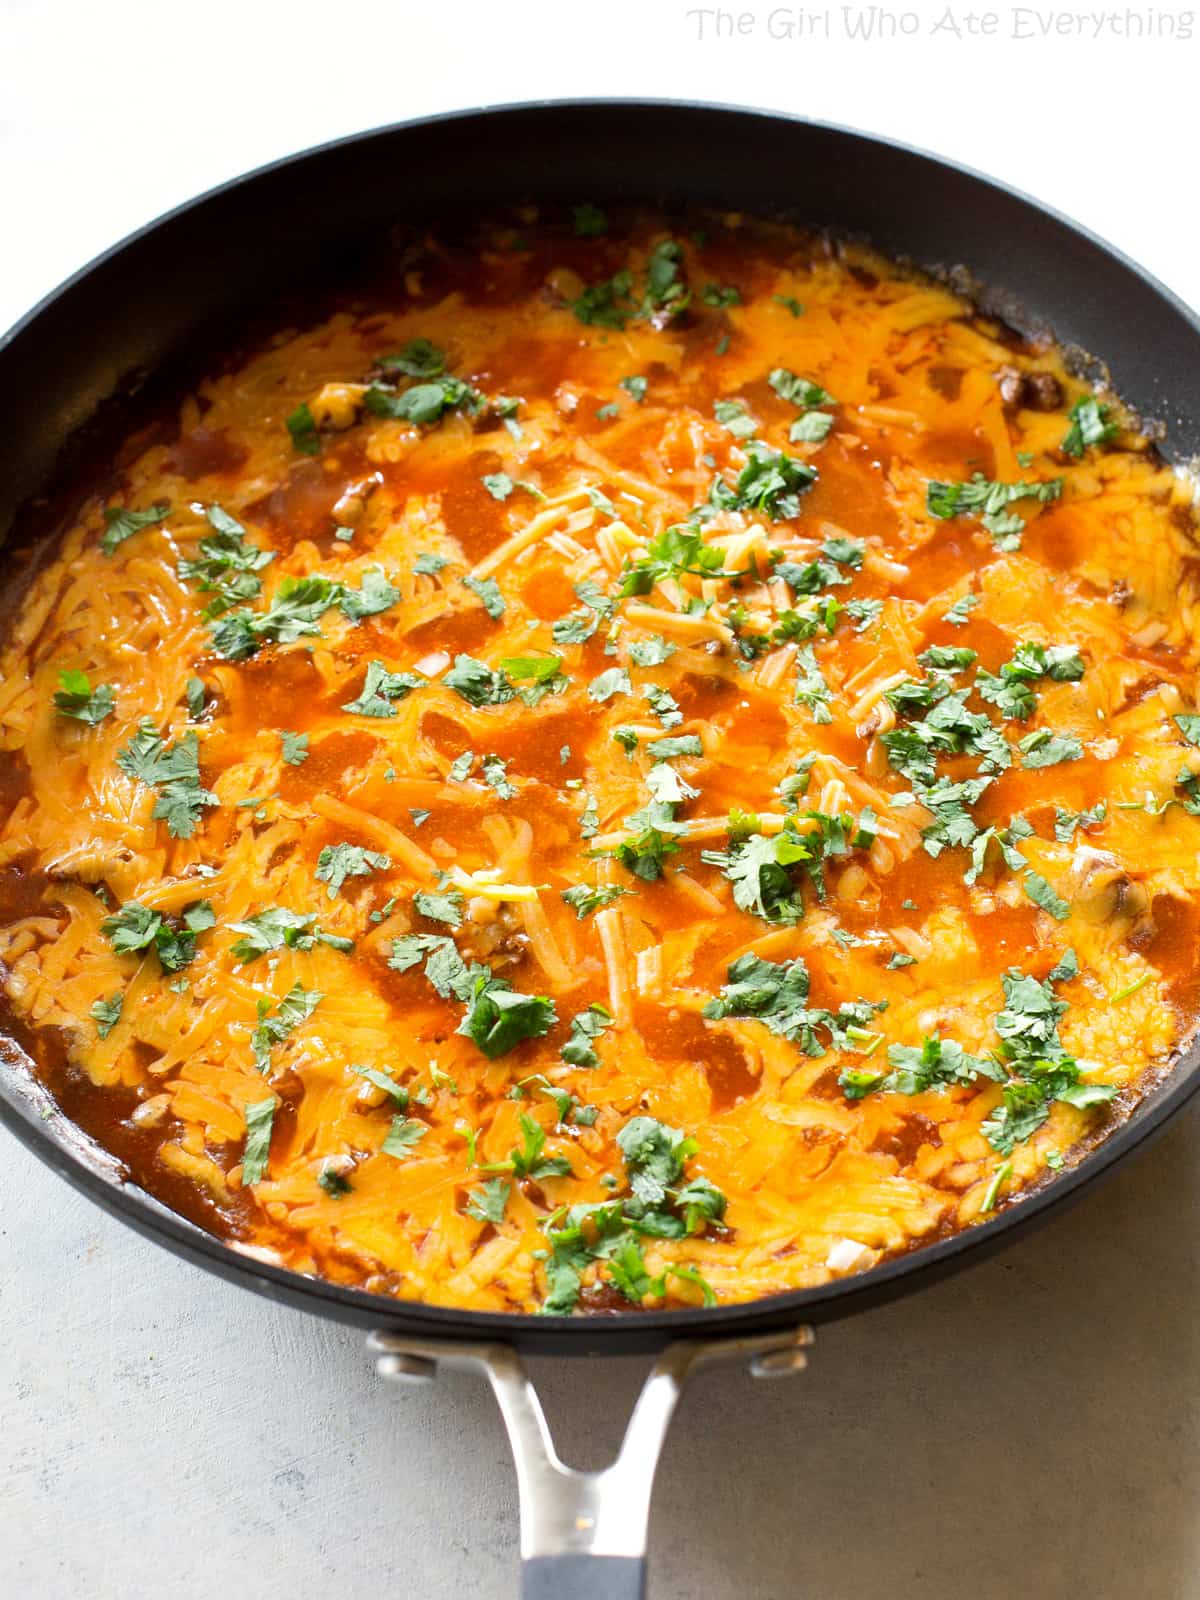 Beef Enchilada Dip Recipe - The Girl Who Ate Everything